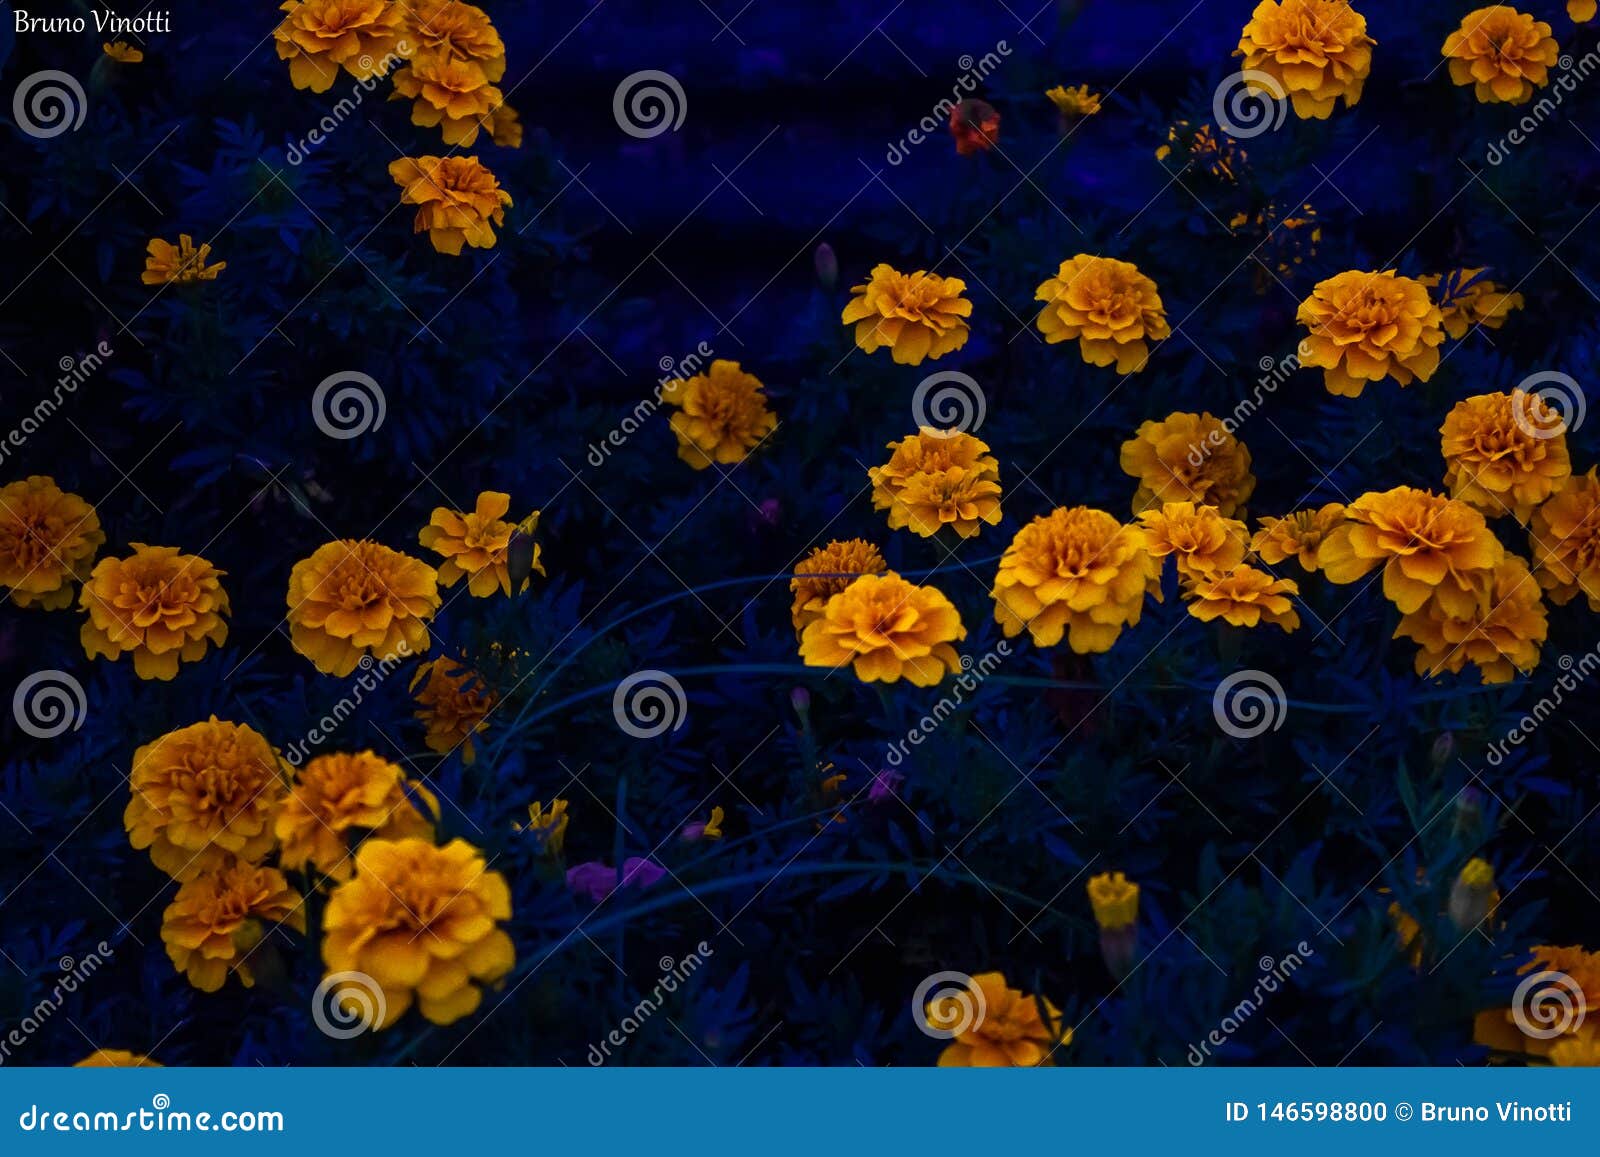 yellow flowers and blue hour